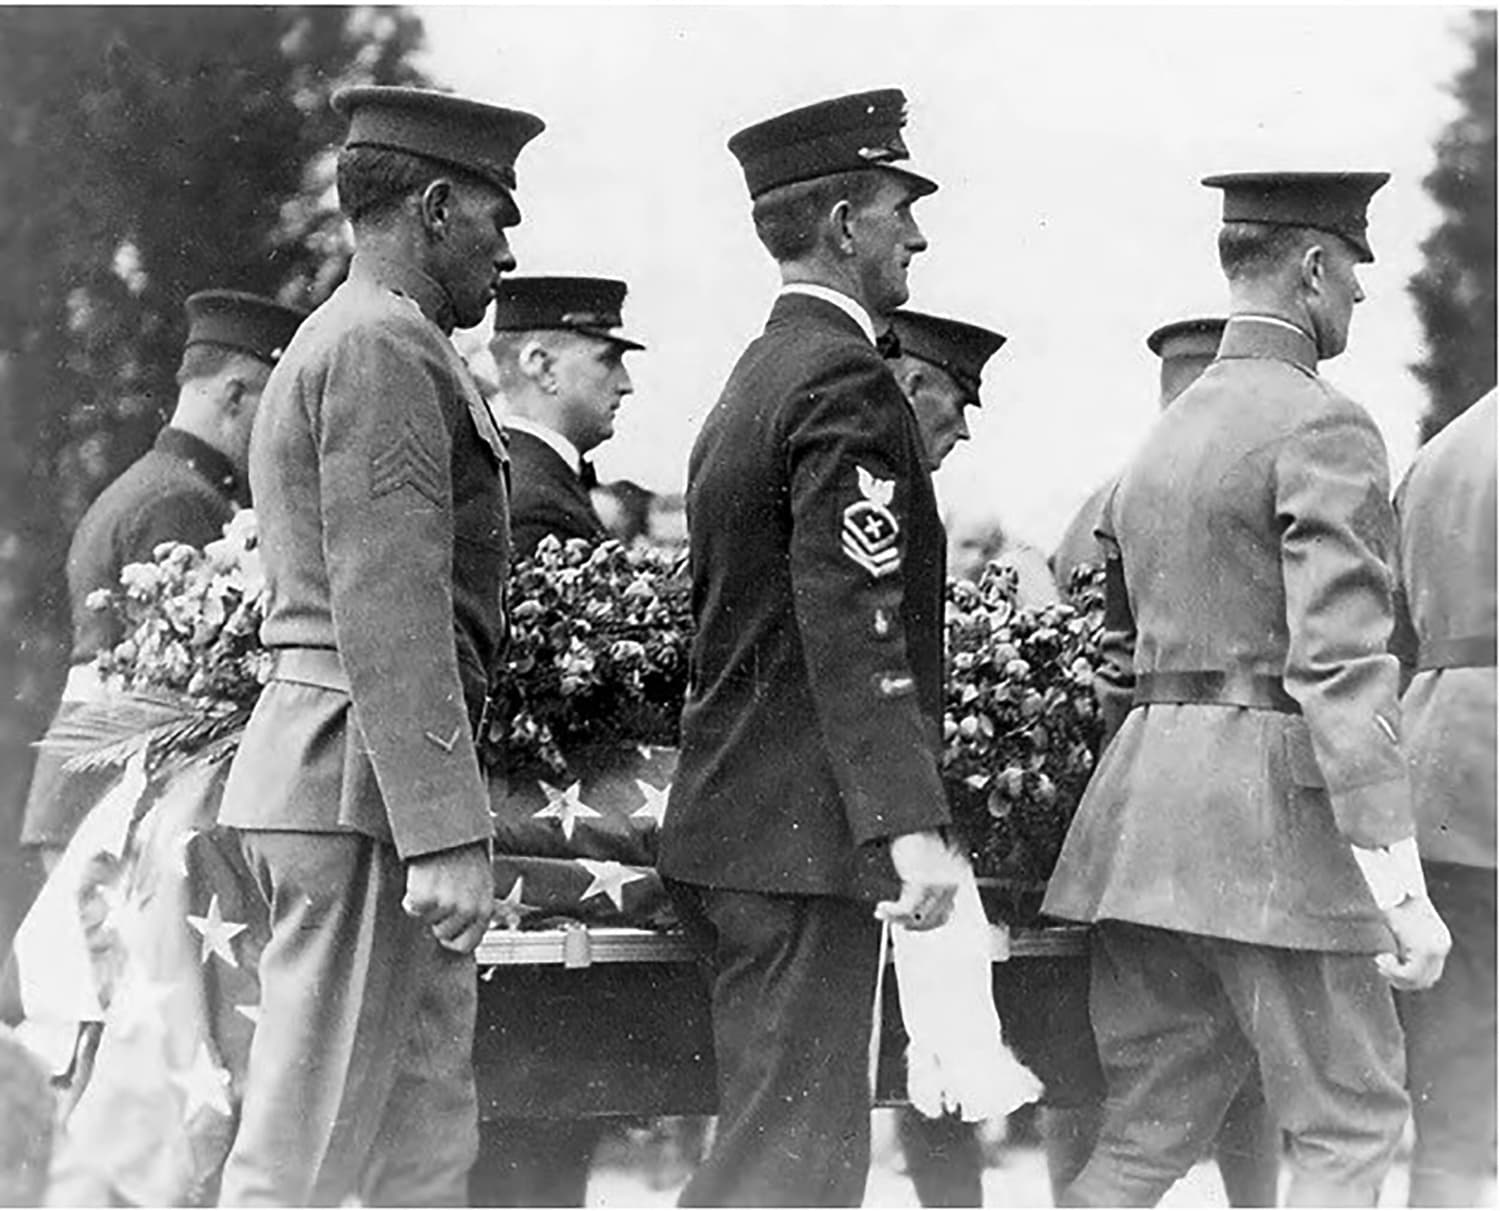 The eight body bearers carry the unknown soldier's casket during the burial ceremony at Arlington National Cemetery on Nov. 11, 1921. (Courtesy)